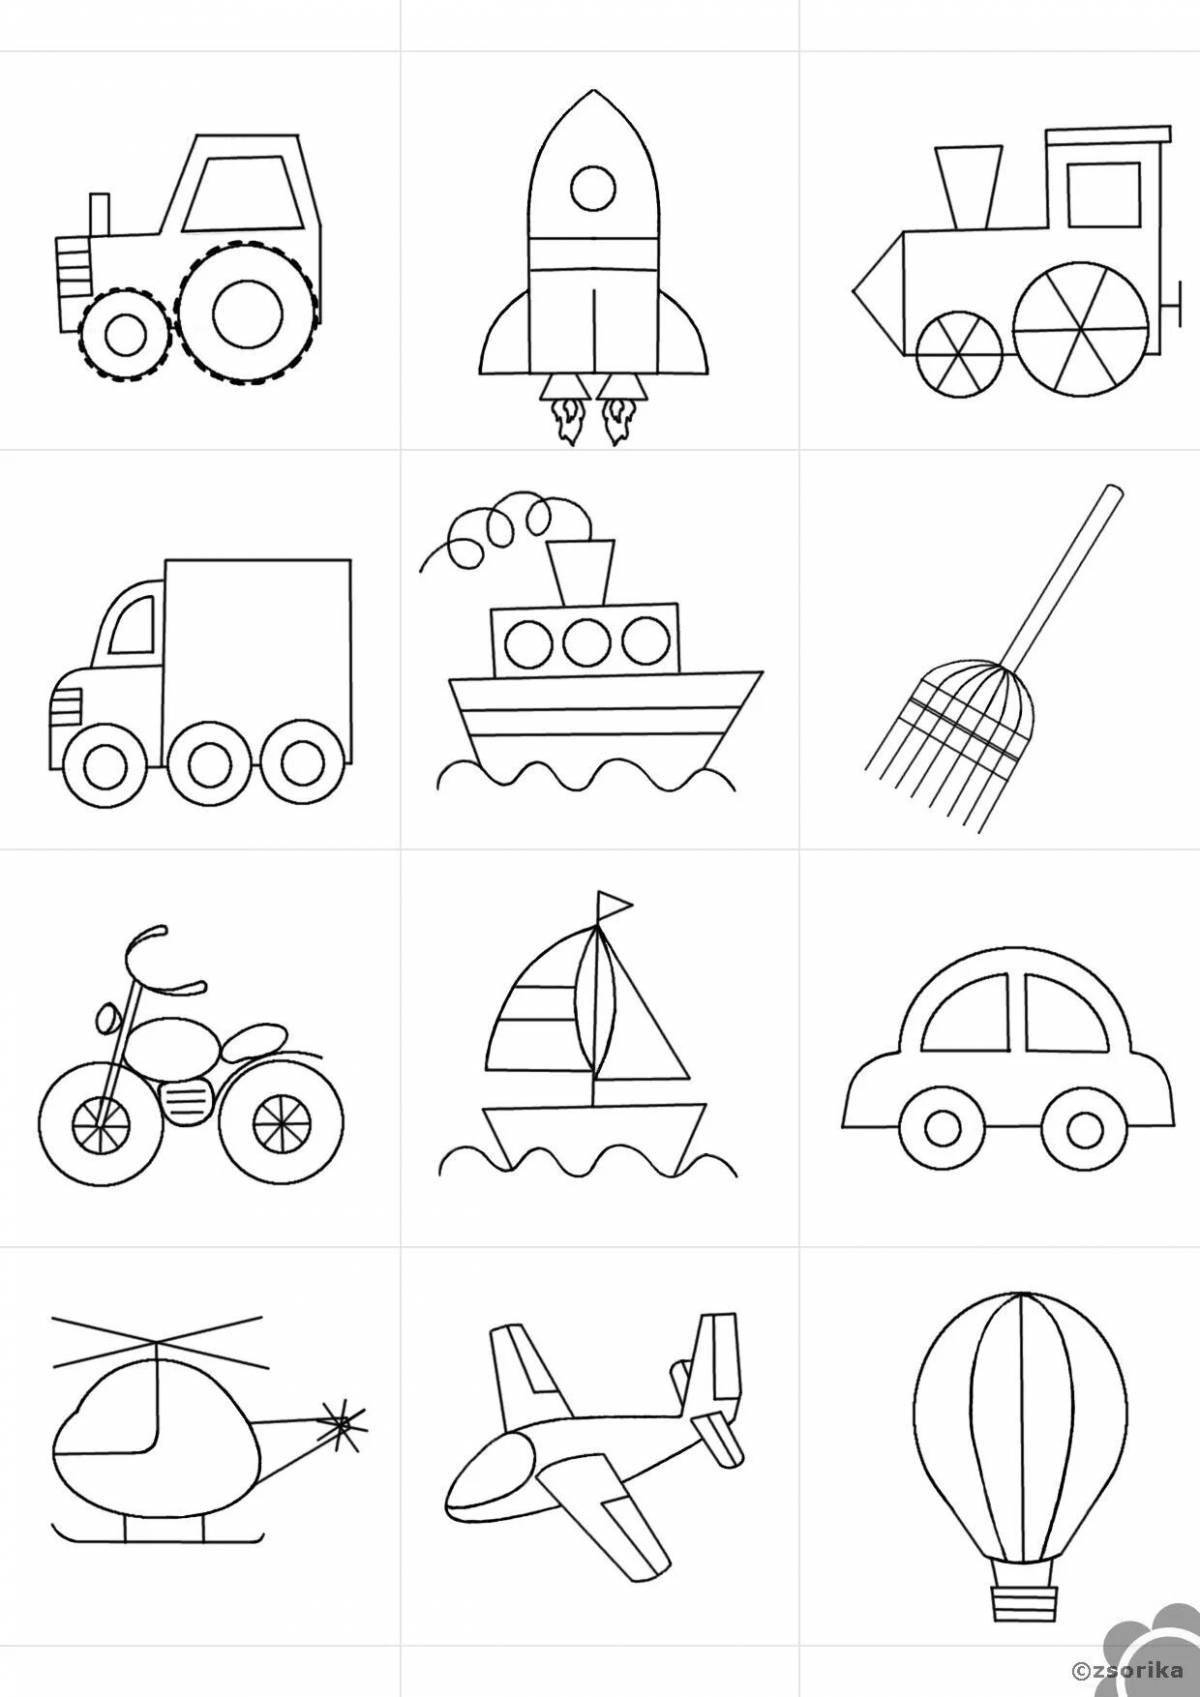 Creative transport coloring book for kids 6-7 years old